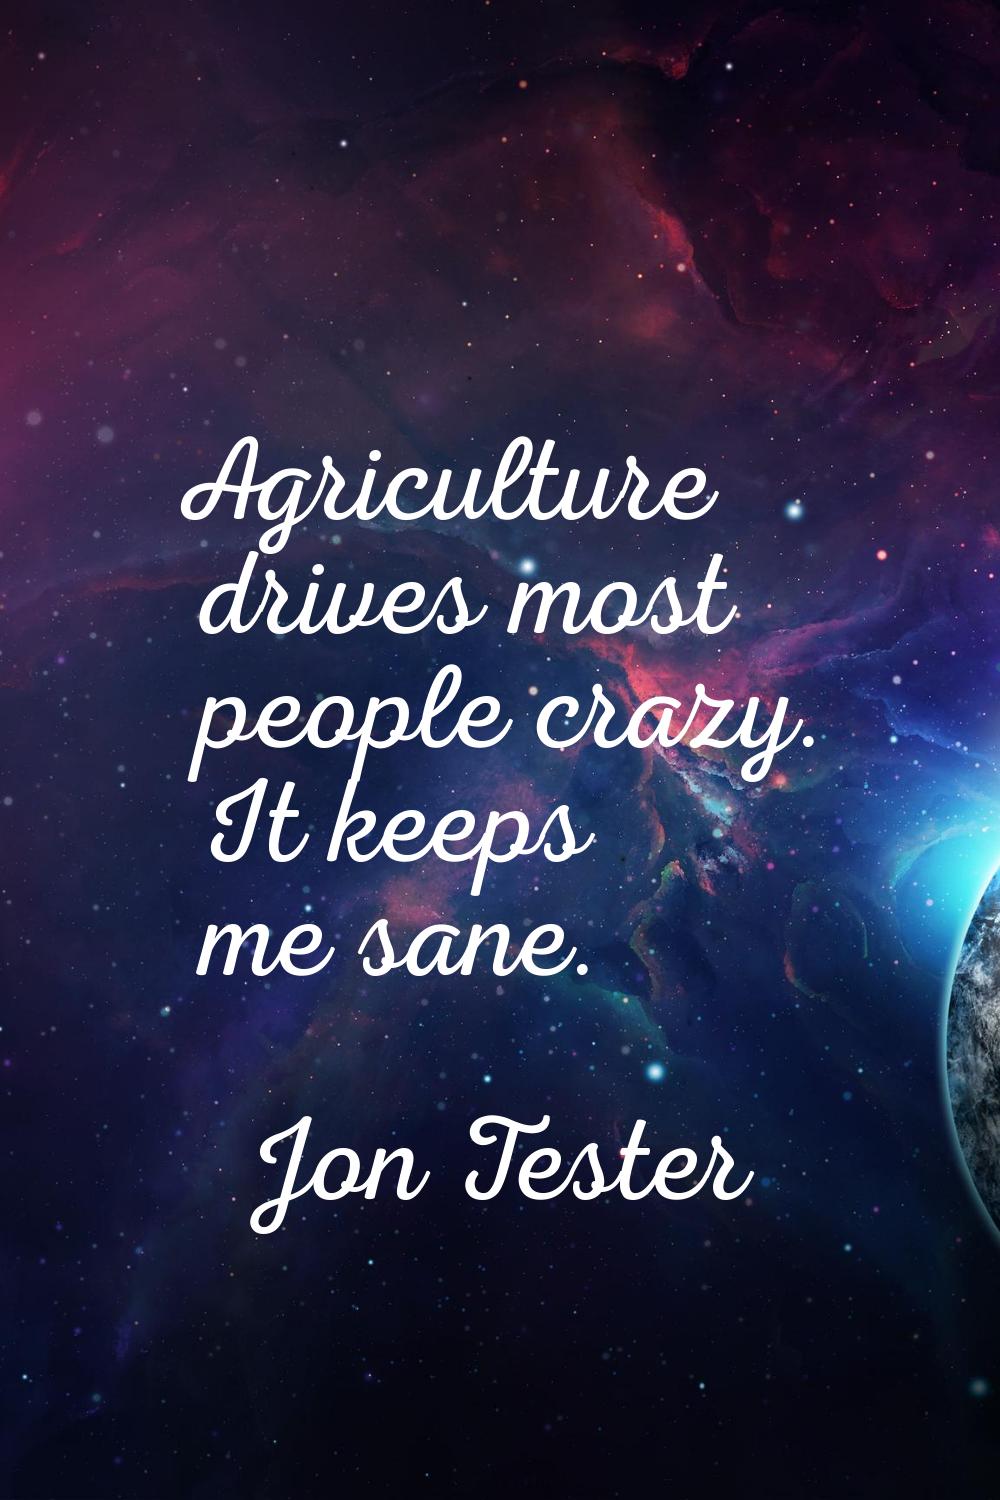 Agriculture drives most people crazy. It keeps me sane.